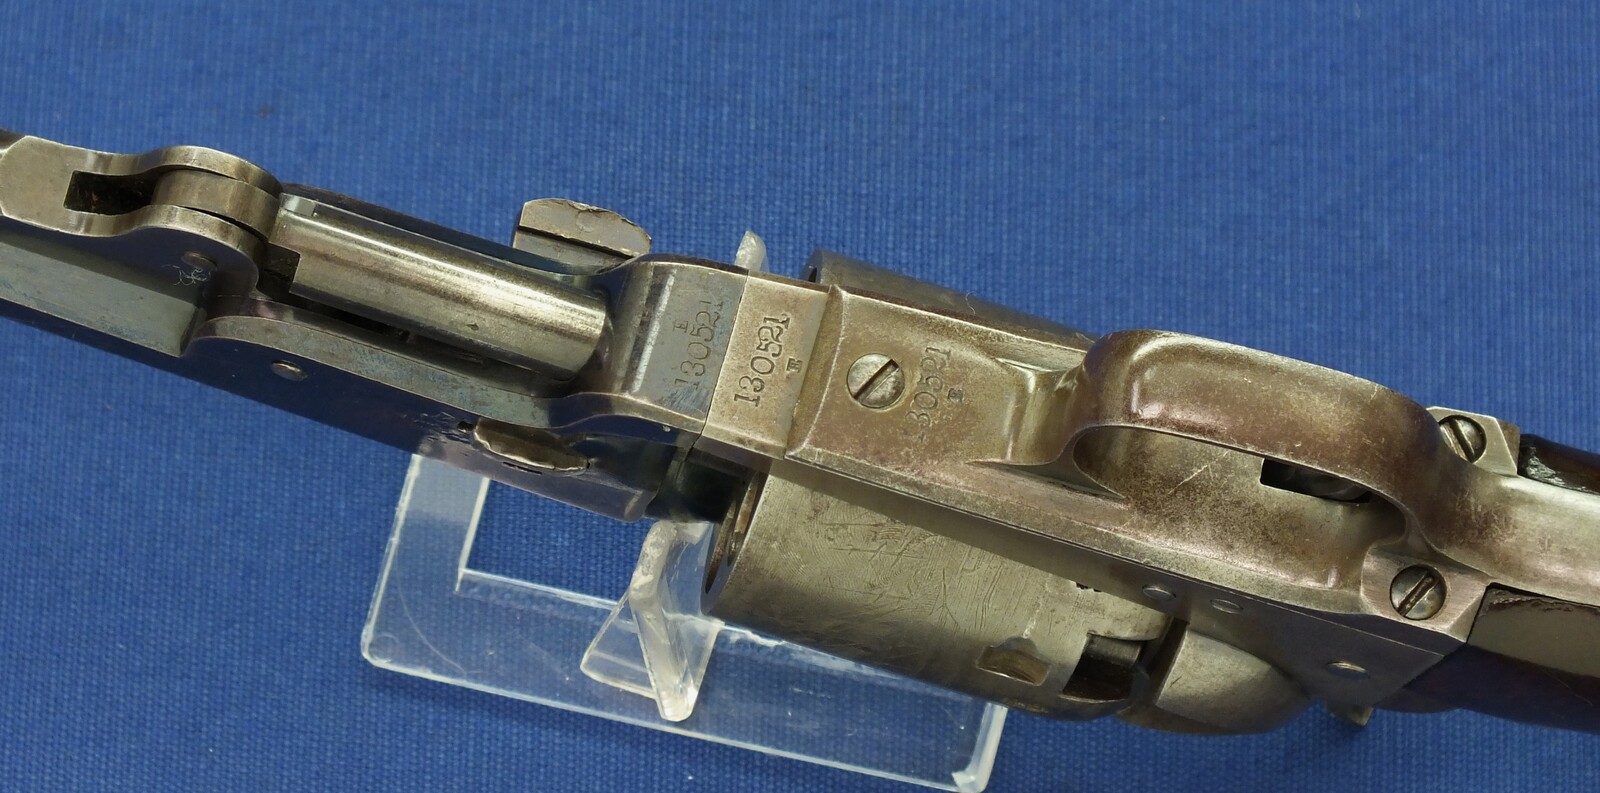 A fine antique Oak cased US-Made Colt 4th model 1851 Navy with large iron triggerguard sent to the London agency and probably distributed to Australia. 6 shot, caliber 36. 7,5inch barrel with U.S America address. In very good condition. Price 8.995 euro